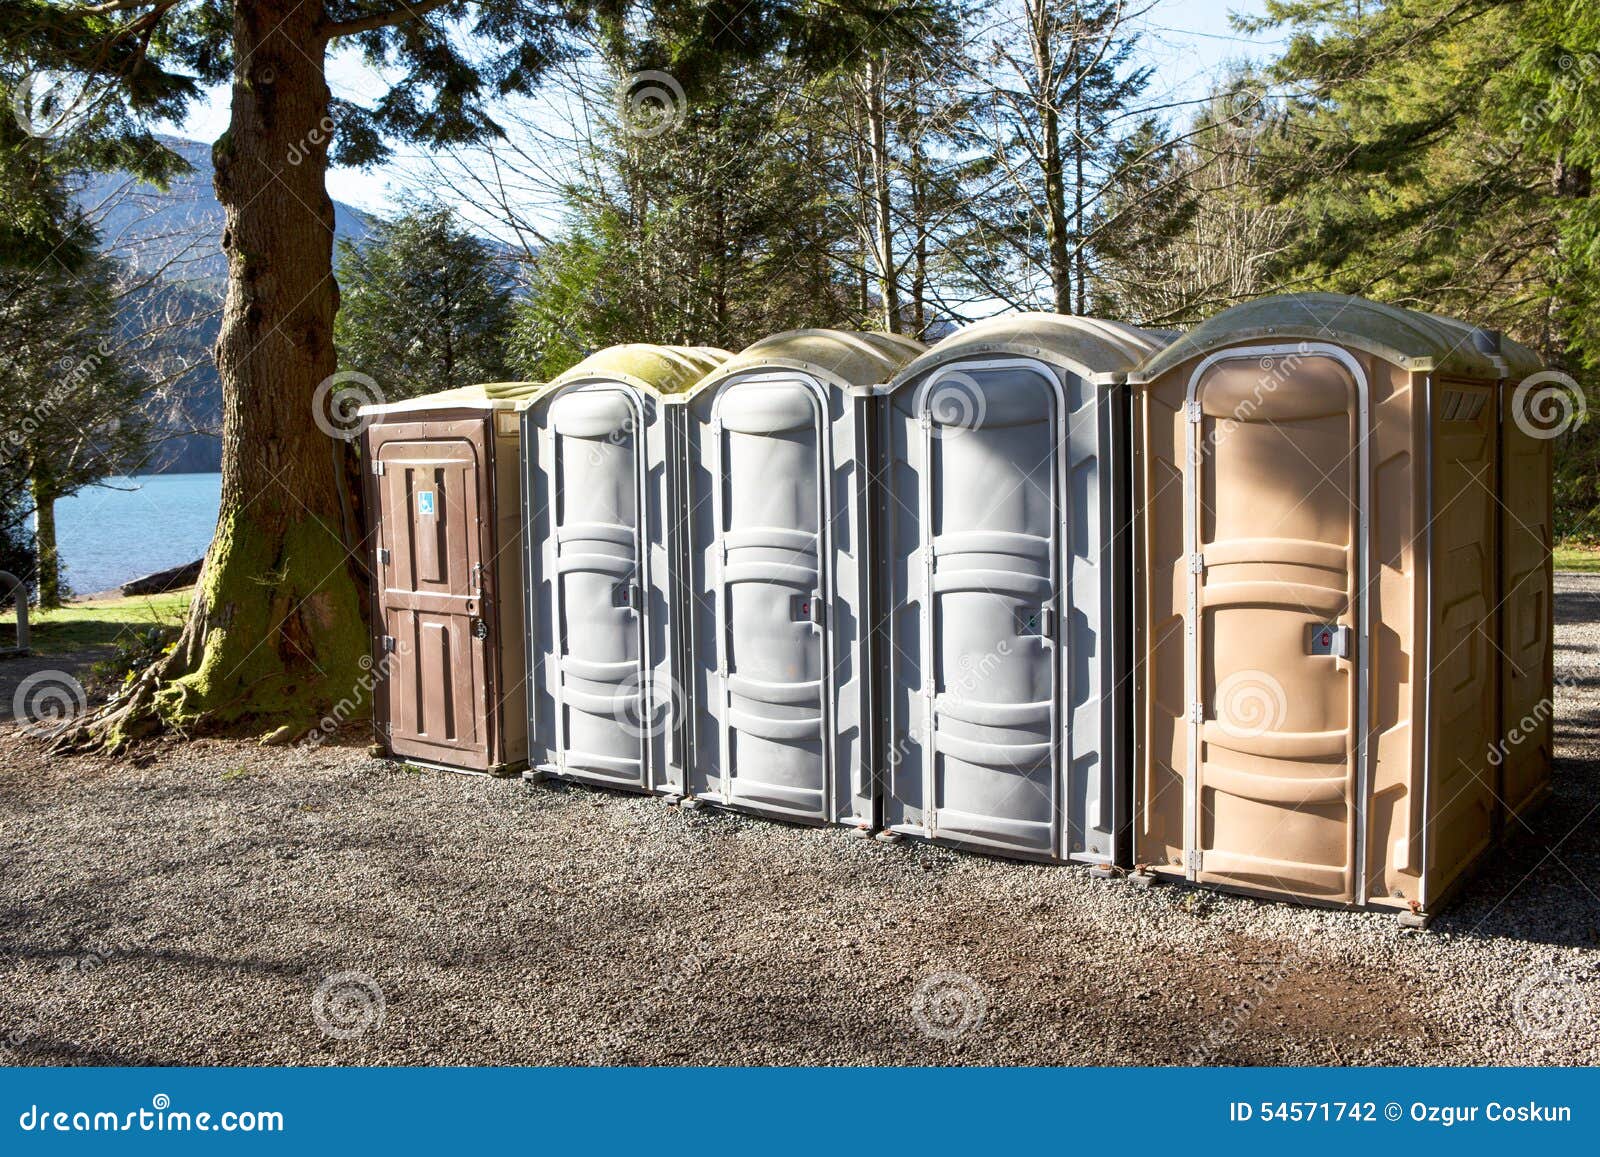 portapotty in a park yard for public convenience